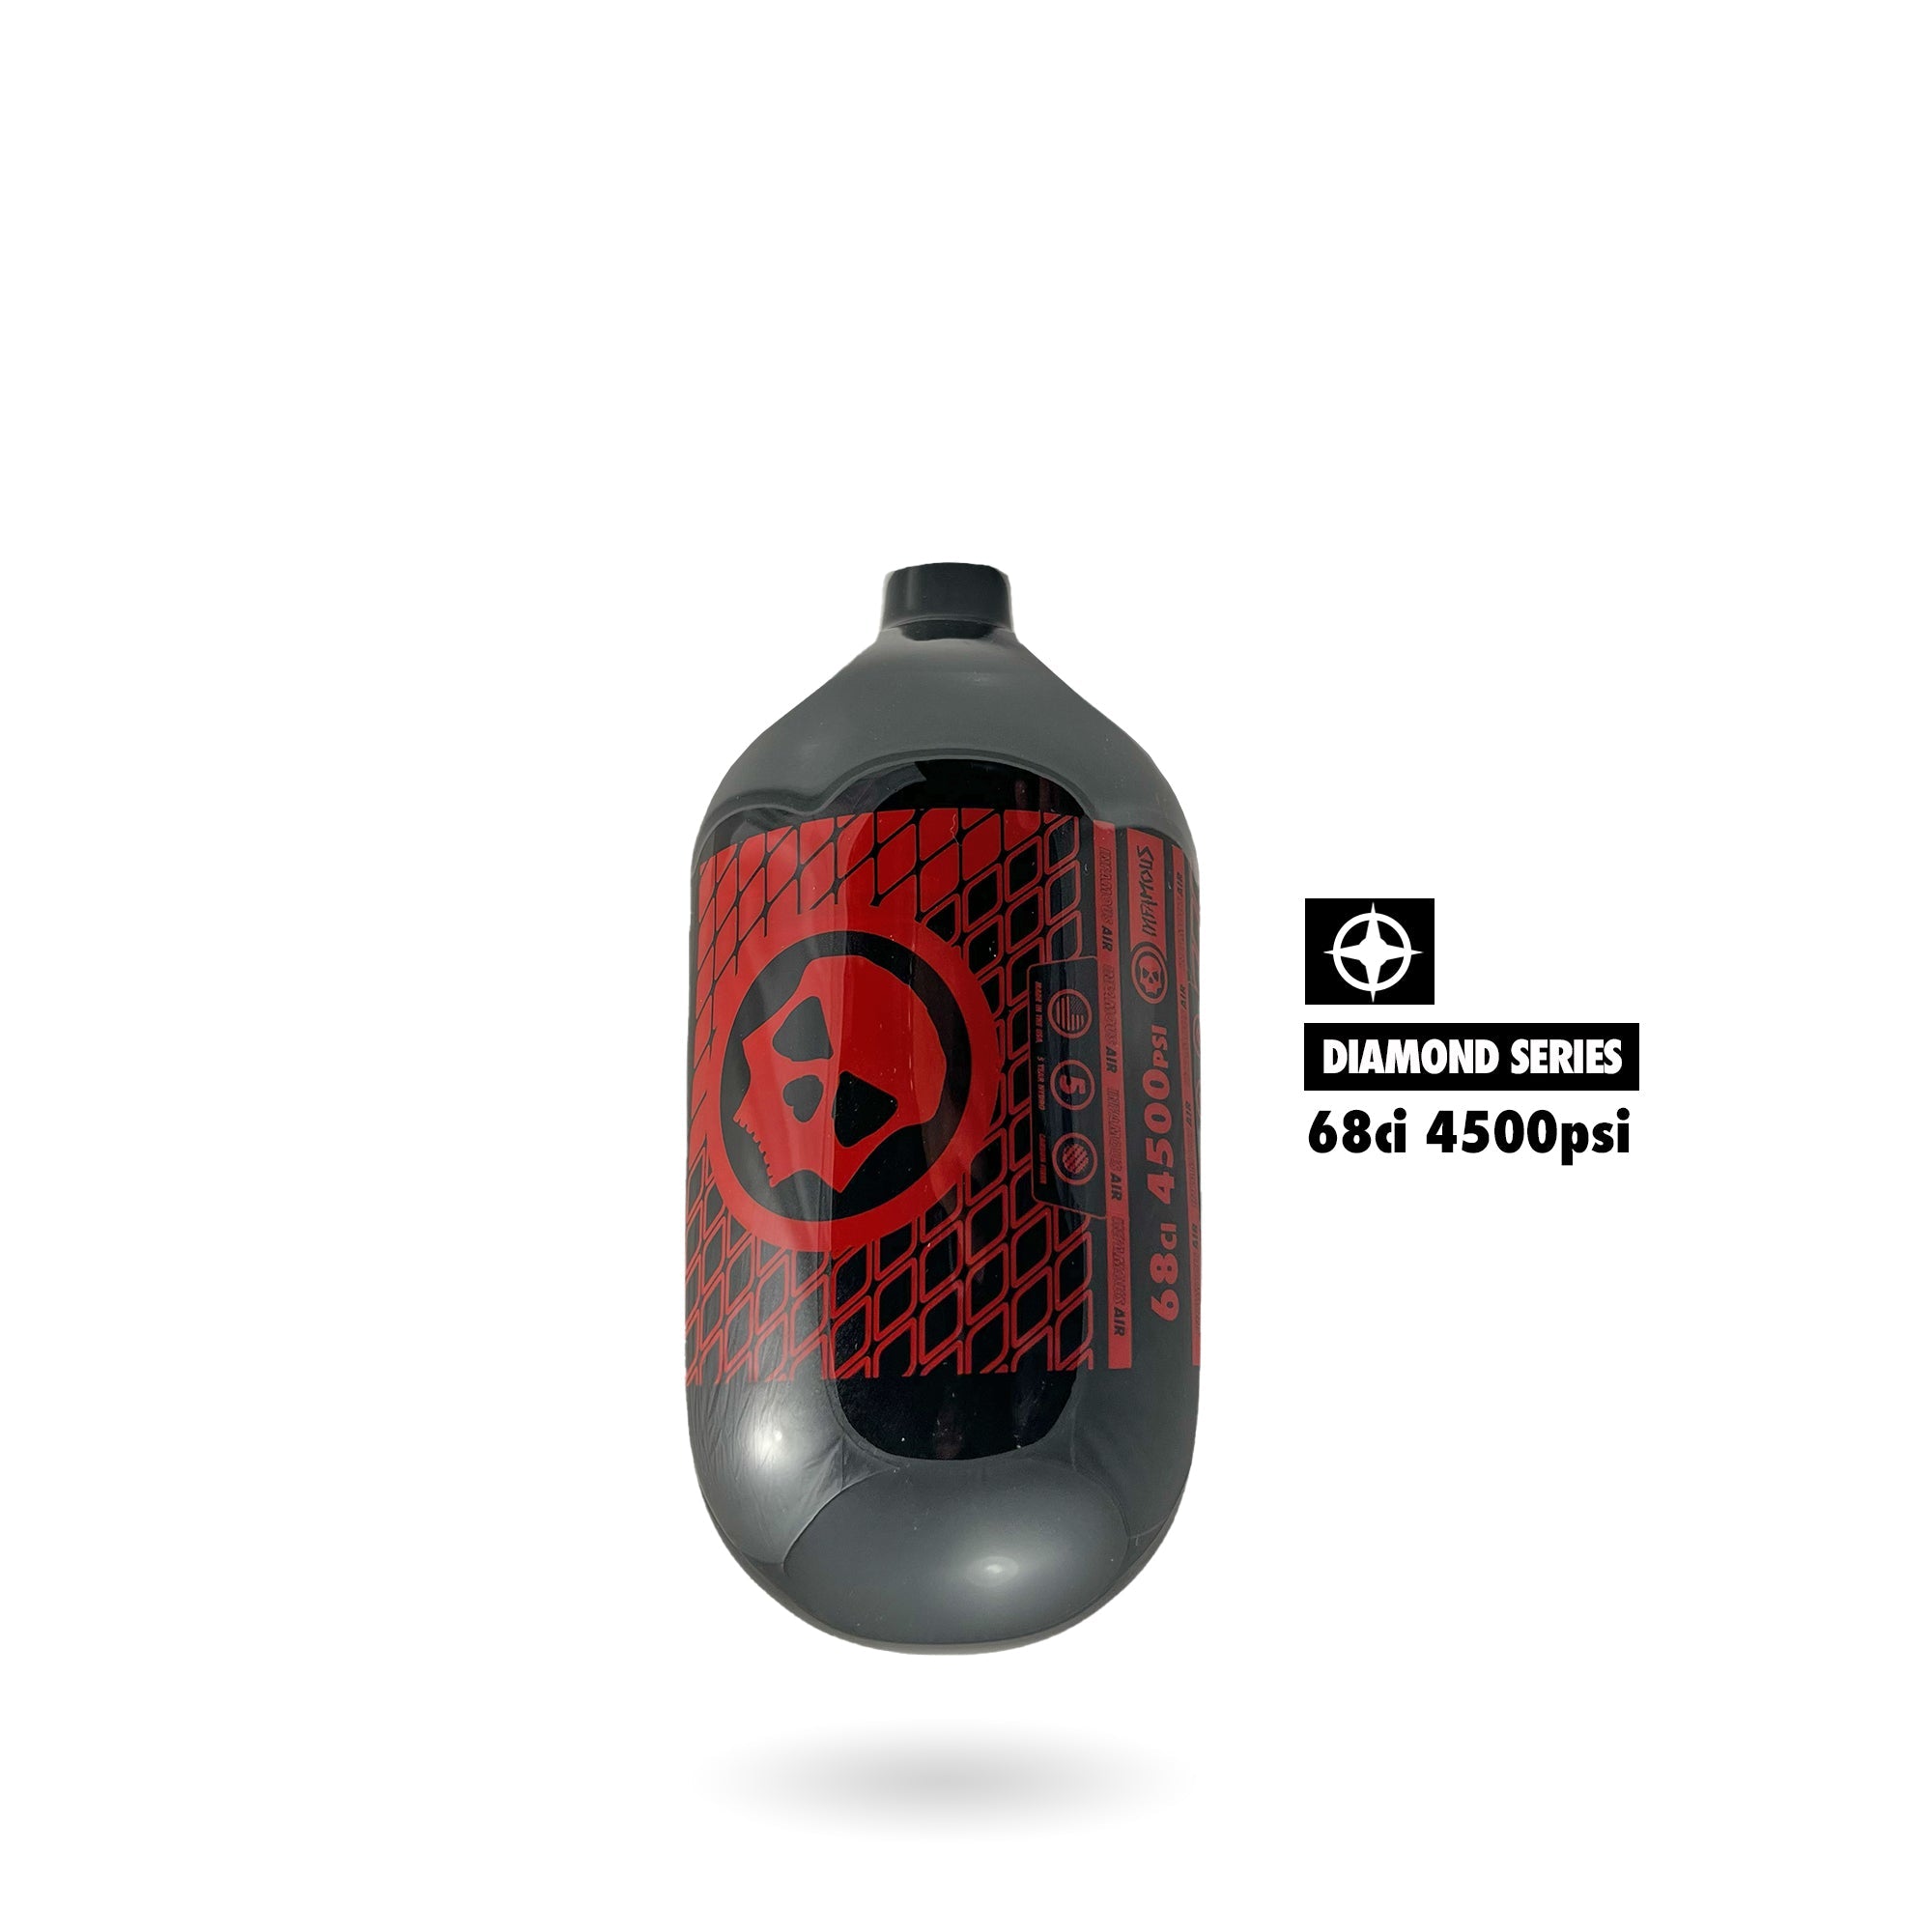 Infamous "Diamond Series" Air Pattern Paintball Tank - 68/4500 - Black / Red - BOTTLE ONLY